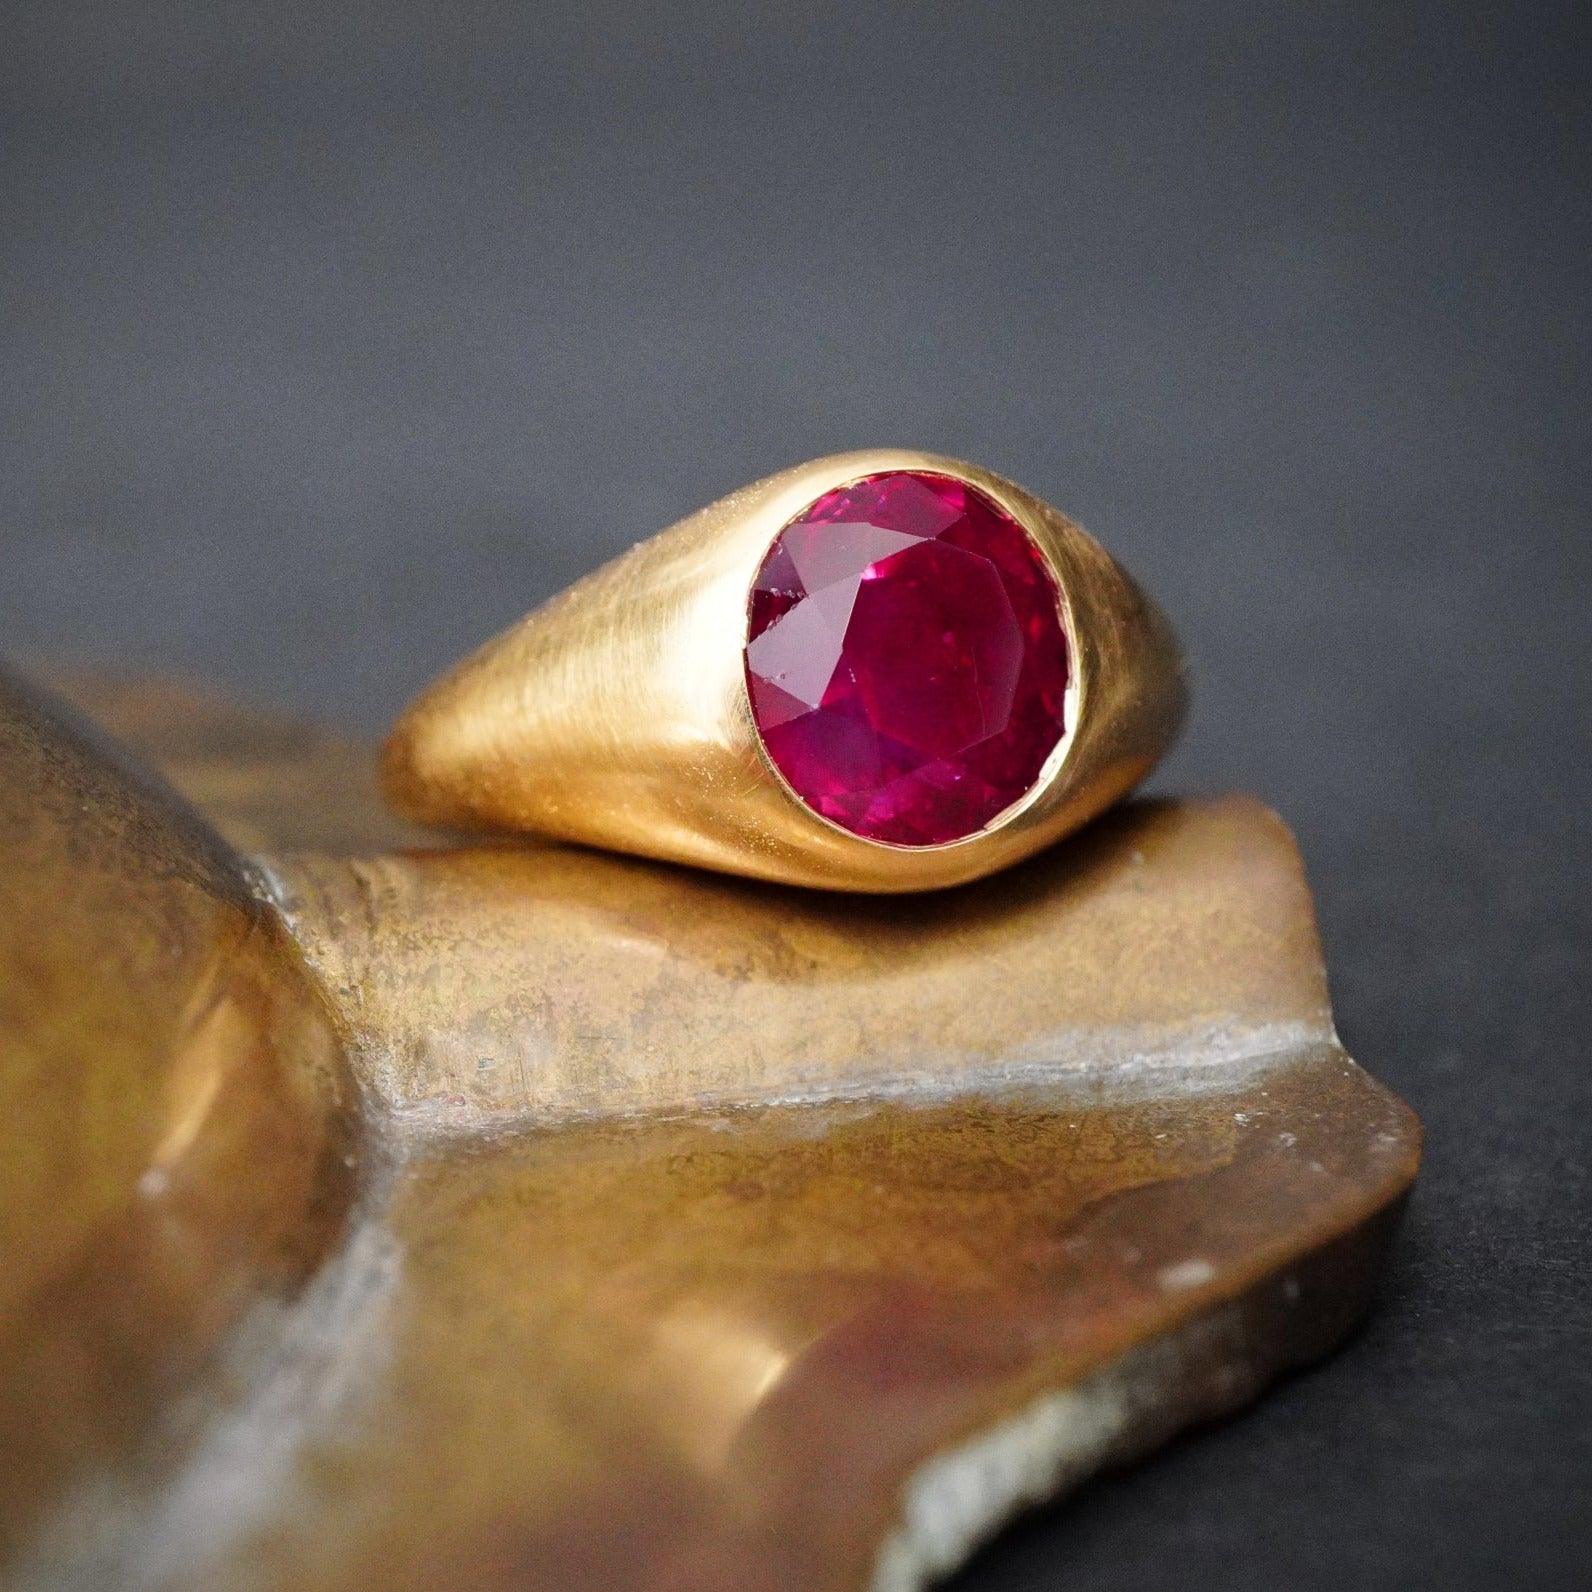 Handcrafted Oval Euro Cut Burmese Ruby Ring - 4.17 CT, No Heat, Yellow Gold Setting, Anup Jogani